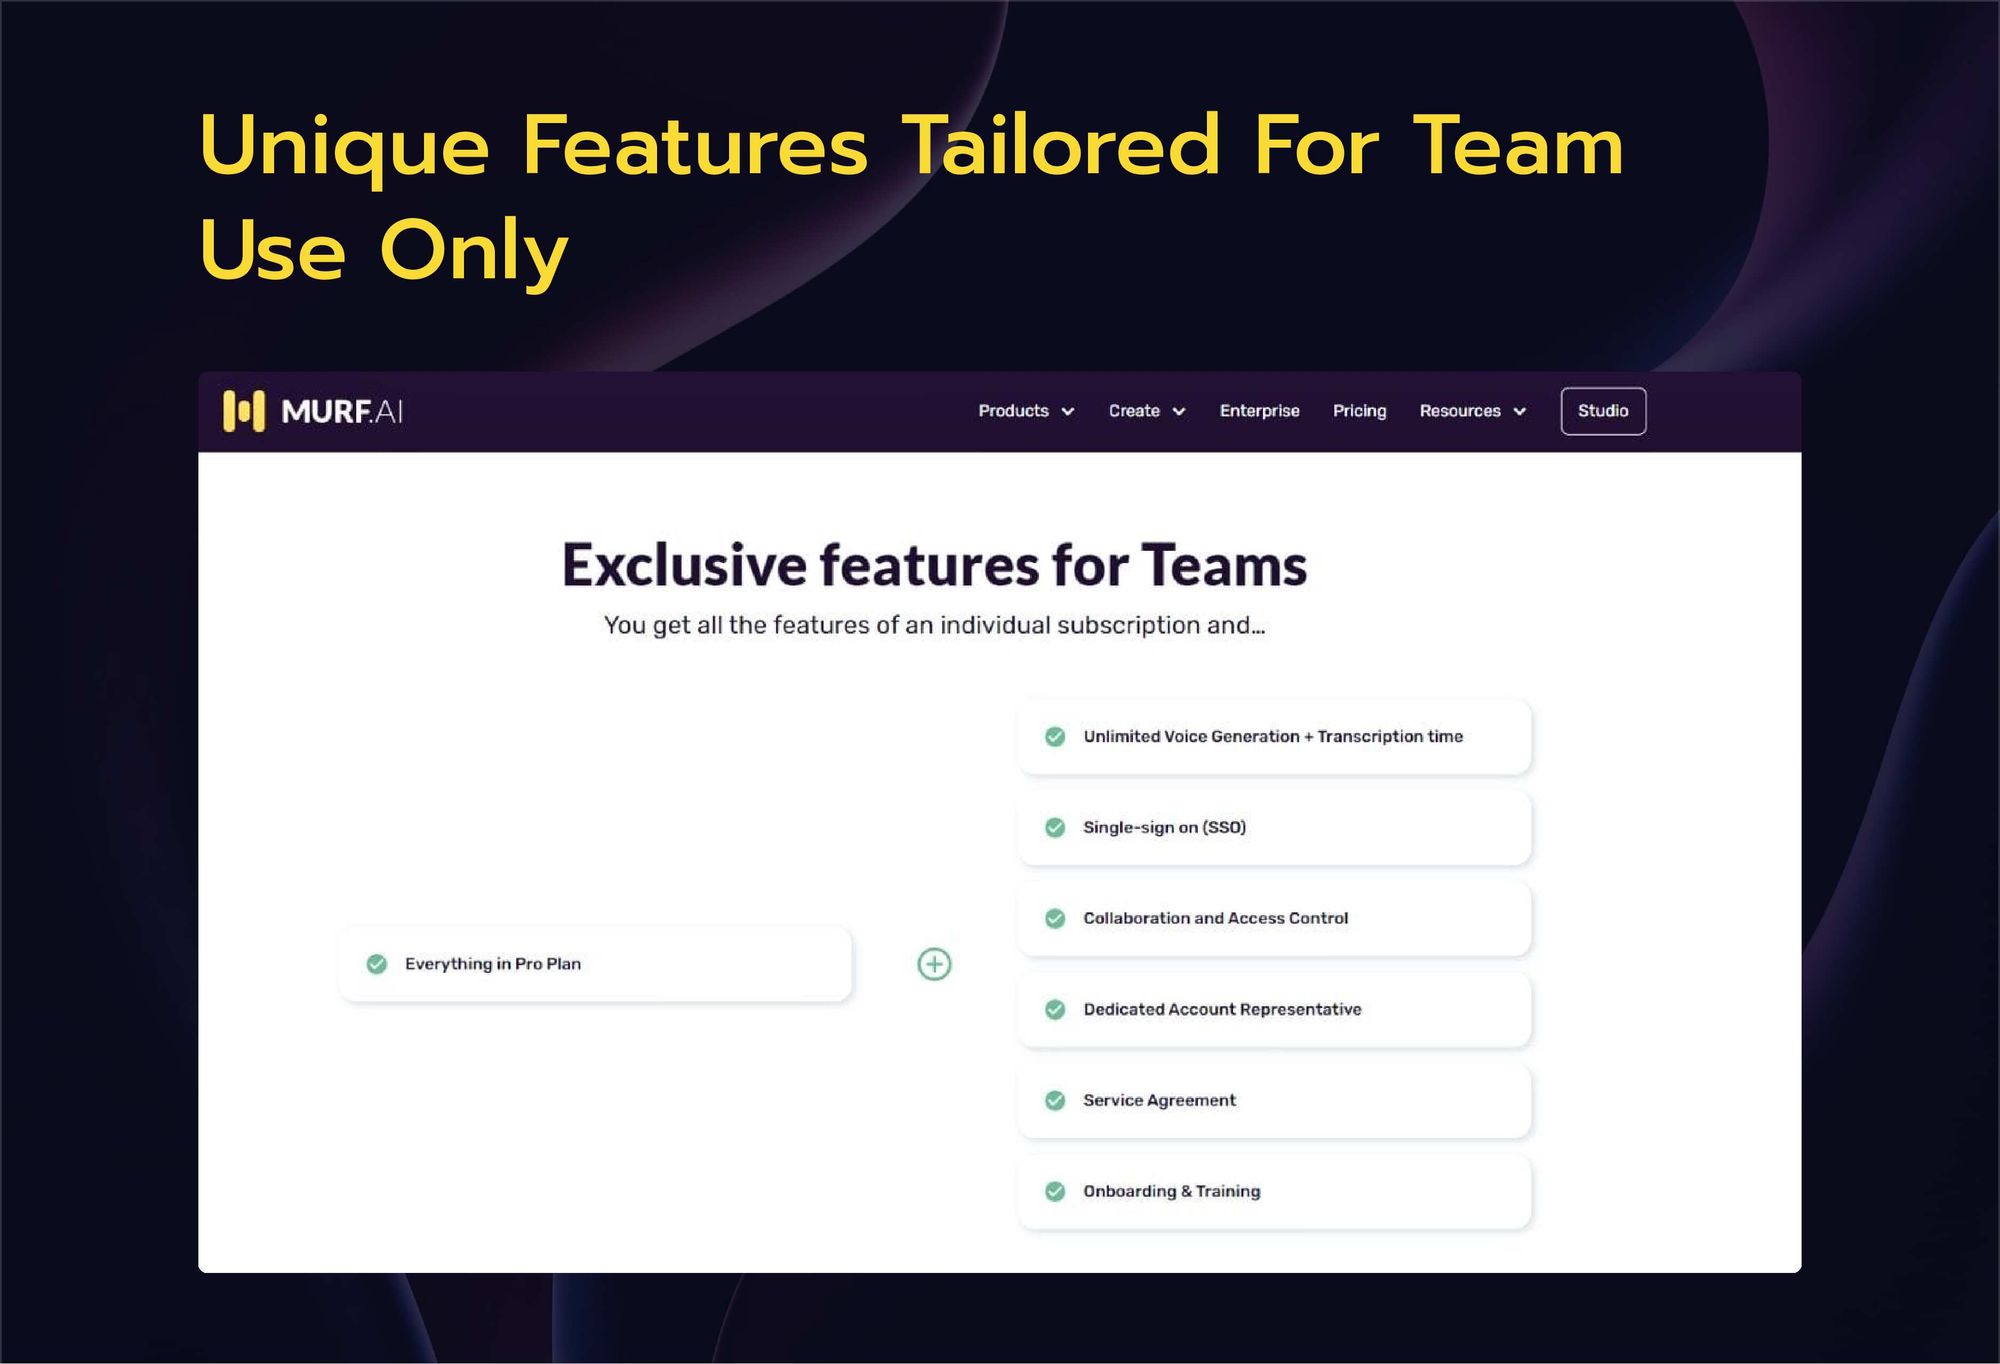 Murf ai has exclusive features for teams 